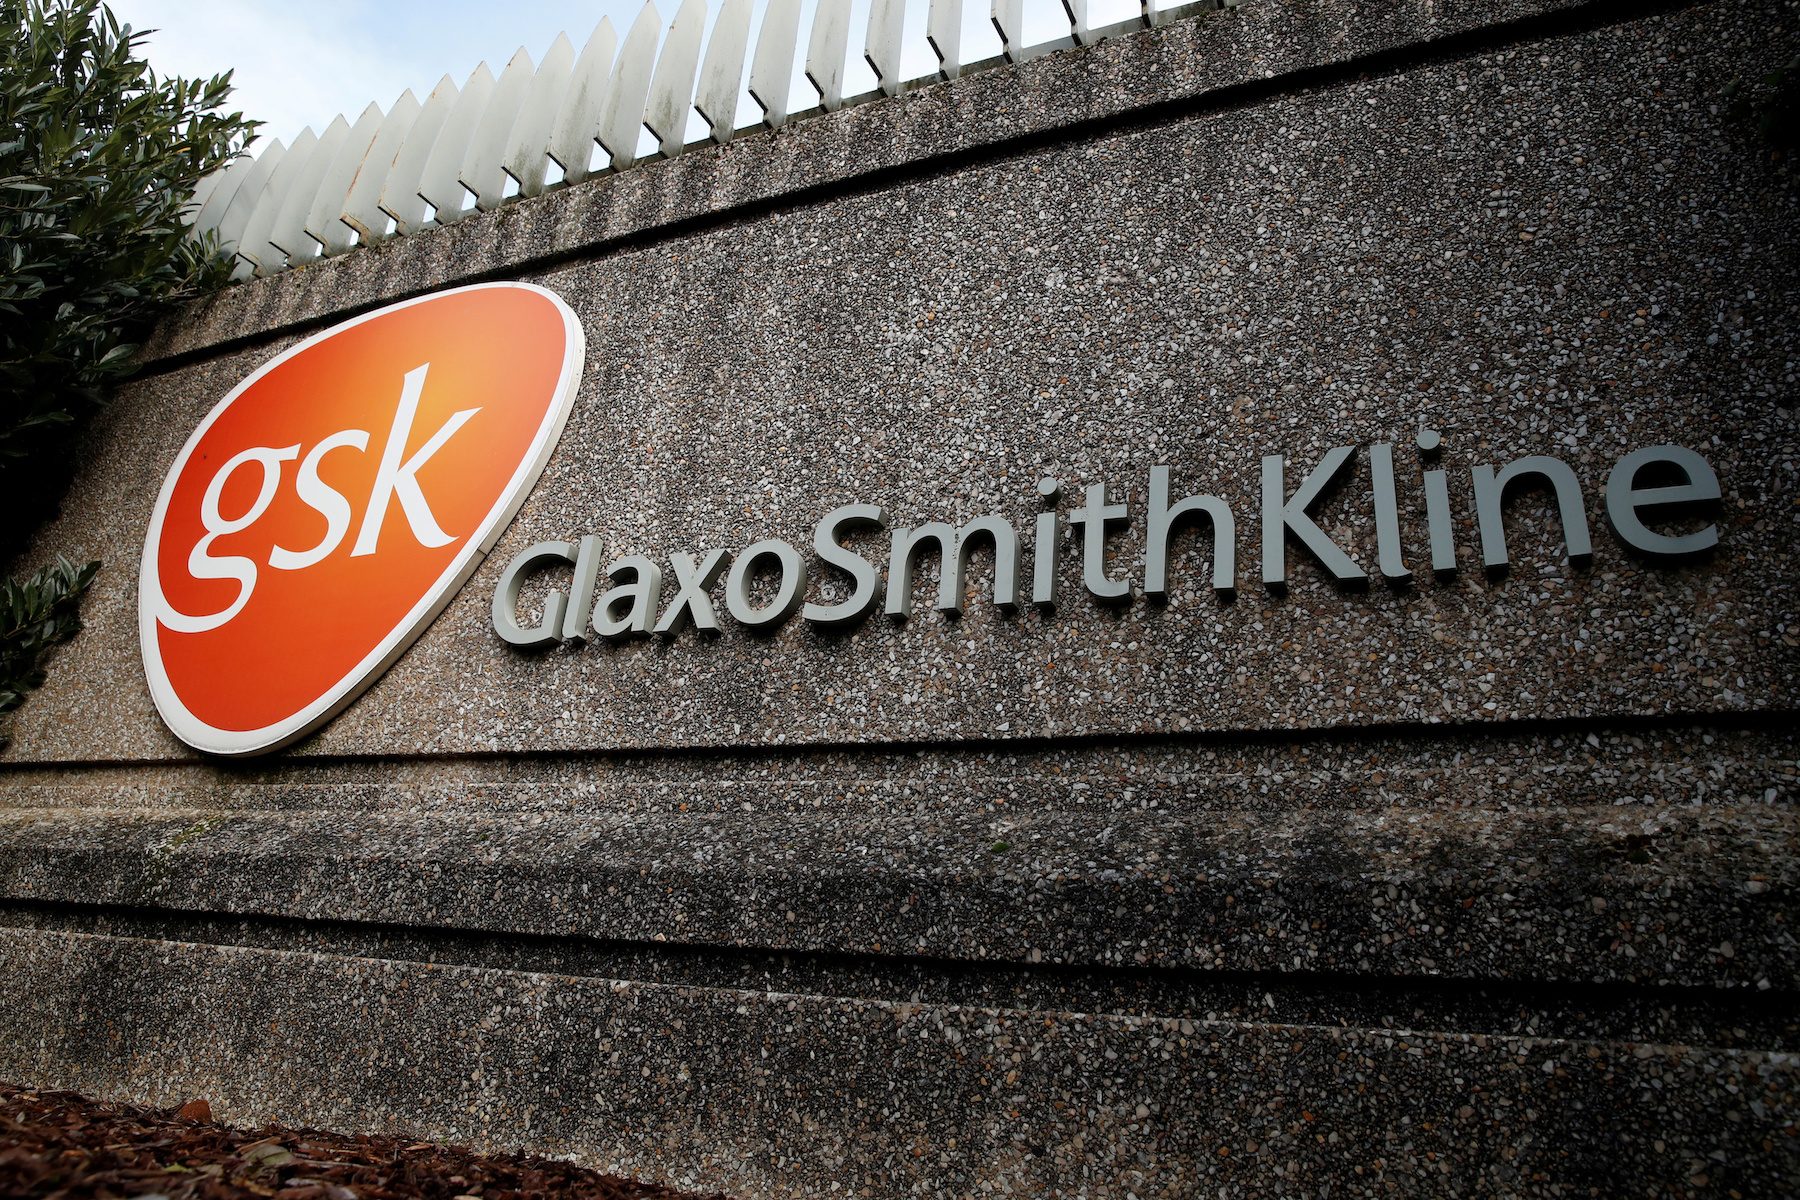 GSK sees lower profit as COVID-19 disruptions drag on